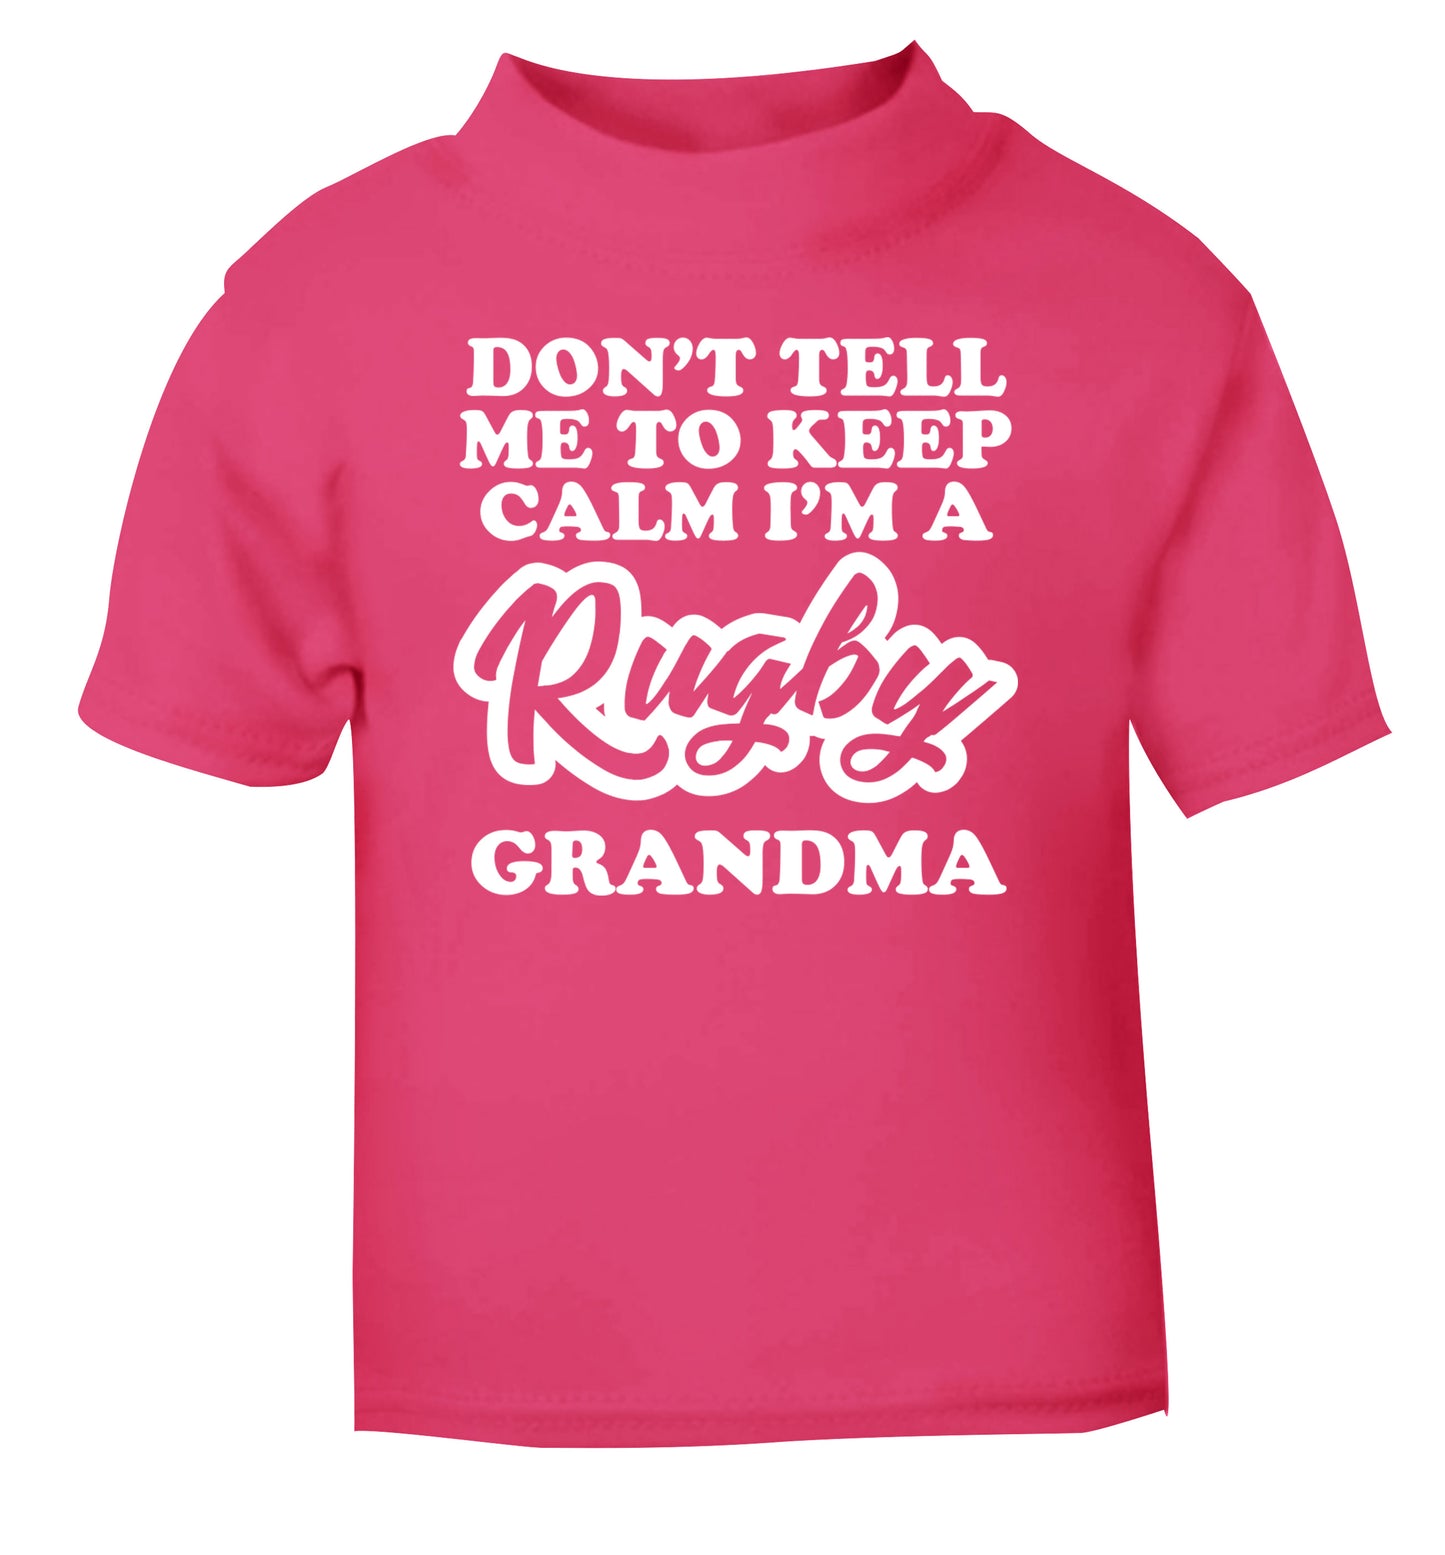 Don't tell me to keep calm I'm a rugby grandma pink Baby Toddler Tshirt 2 Years